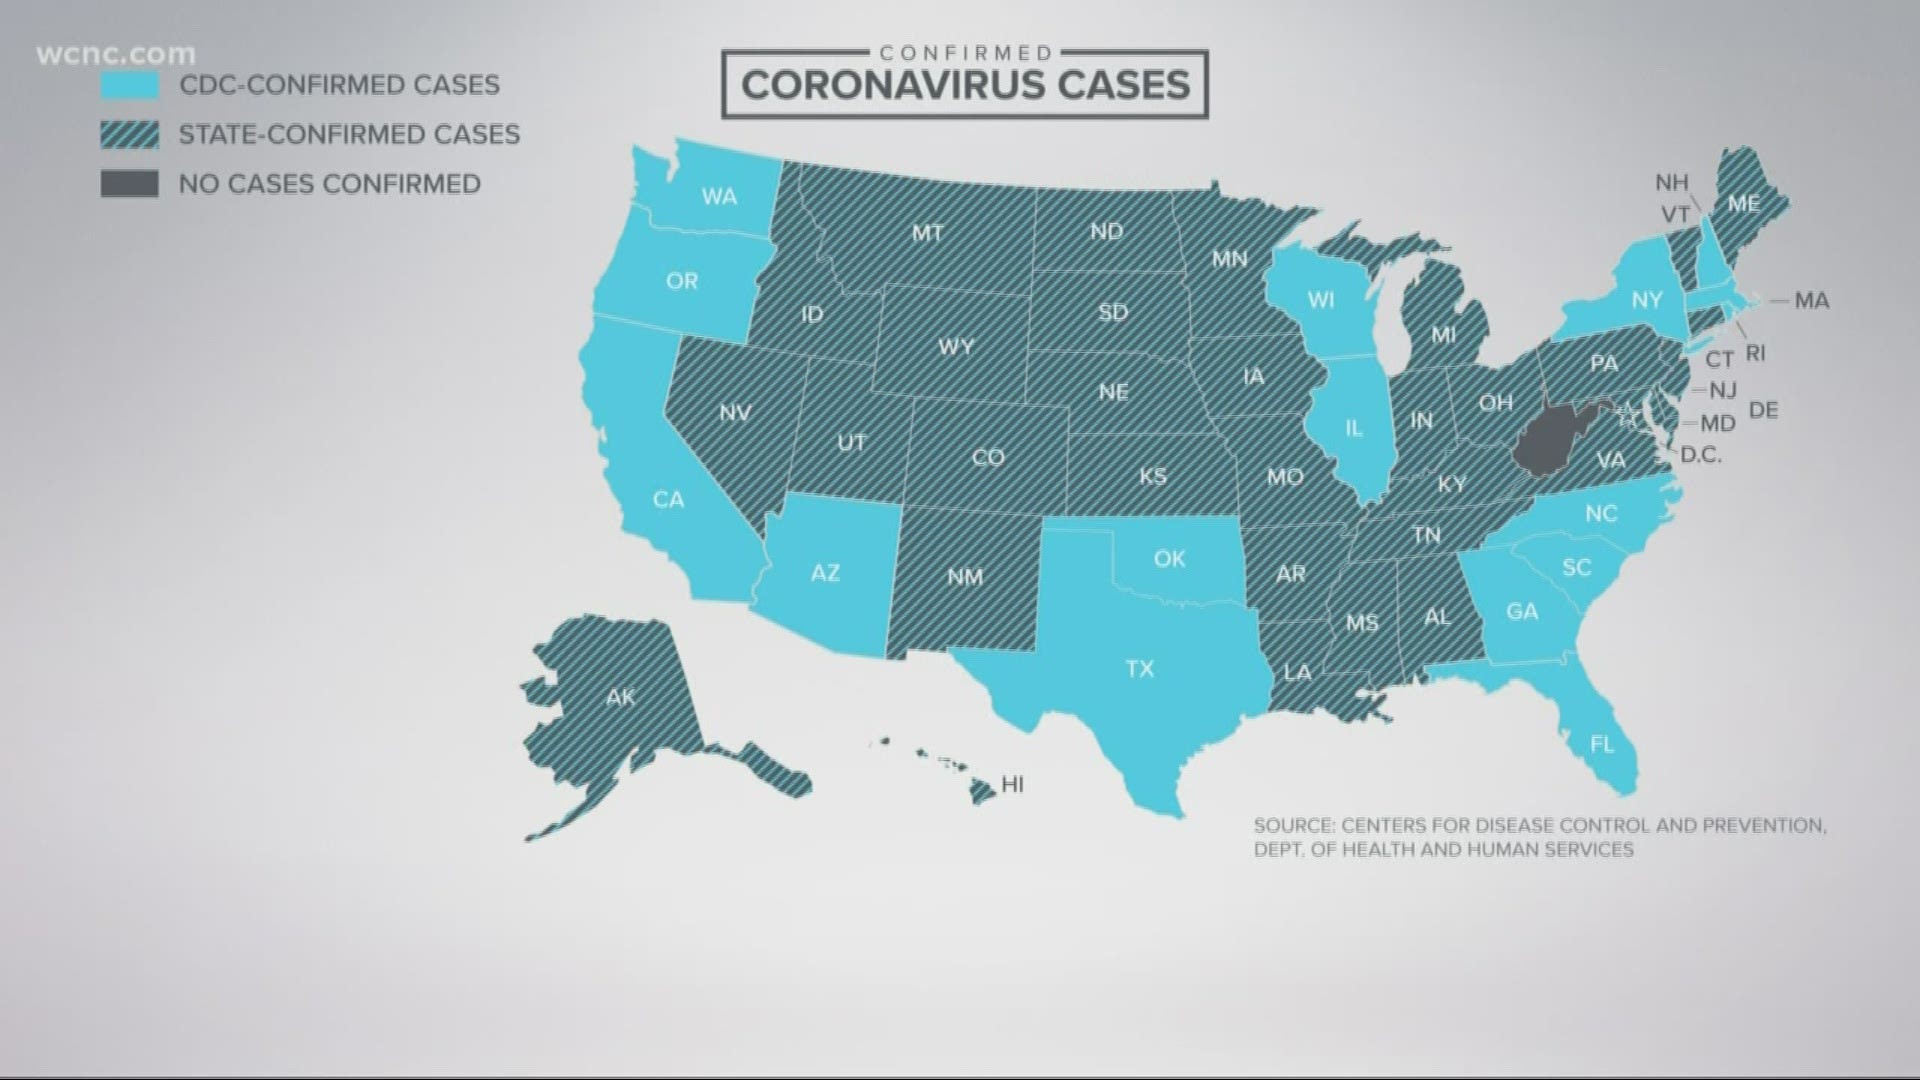 Schools across Charlotte and the country announce closures and modified instruction as coronavirus spreads to nearly every U.S. state.